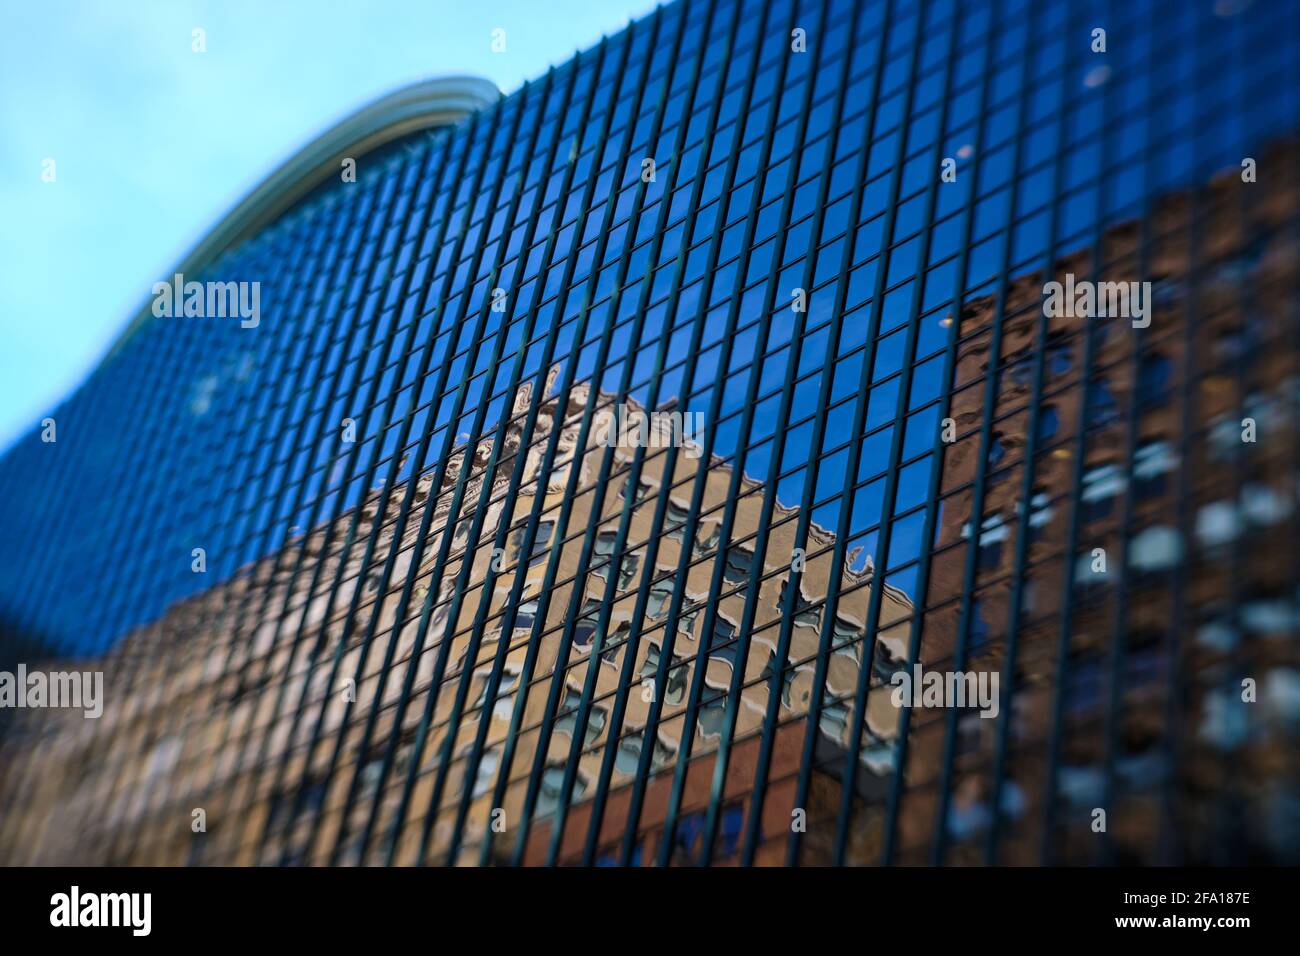 Lensbaby photograph of Chicago architecture Stock Photo